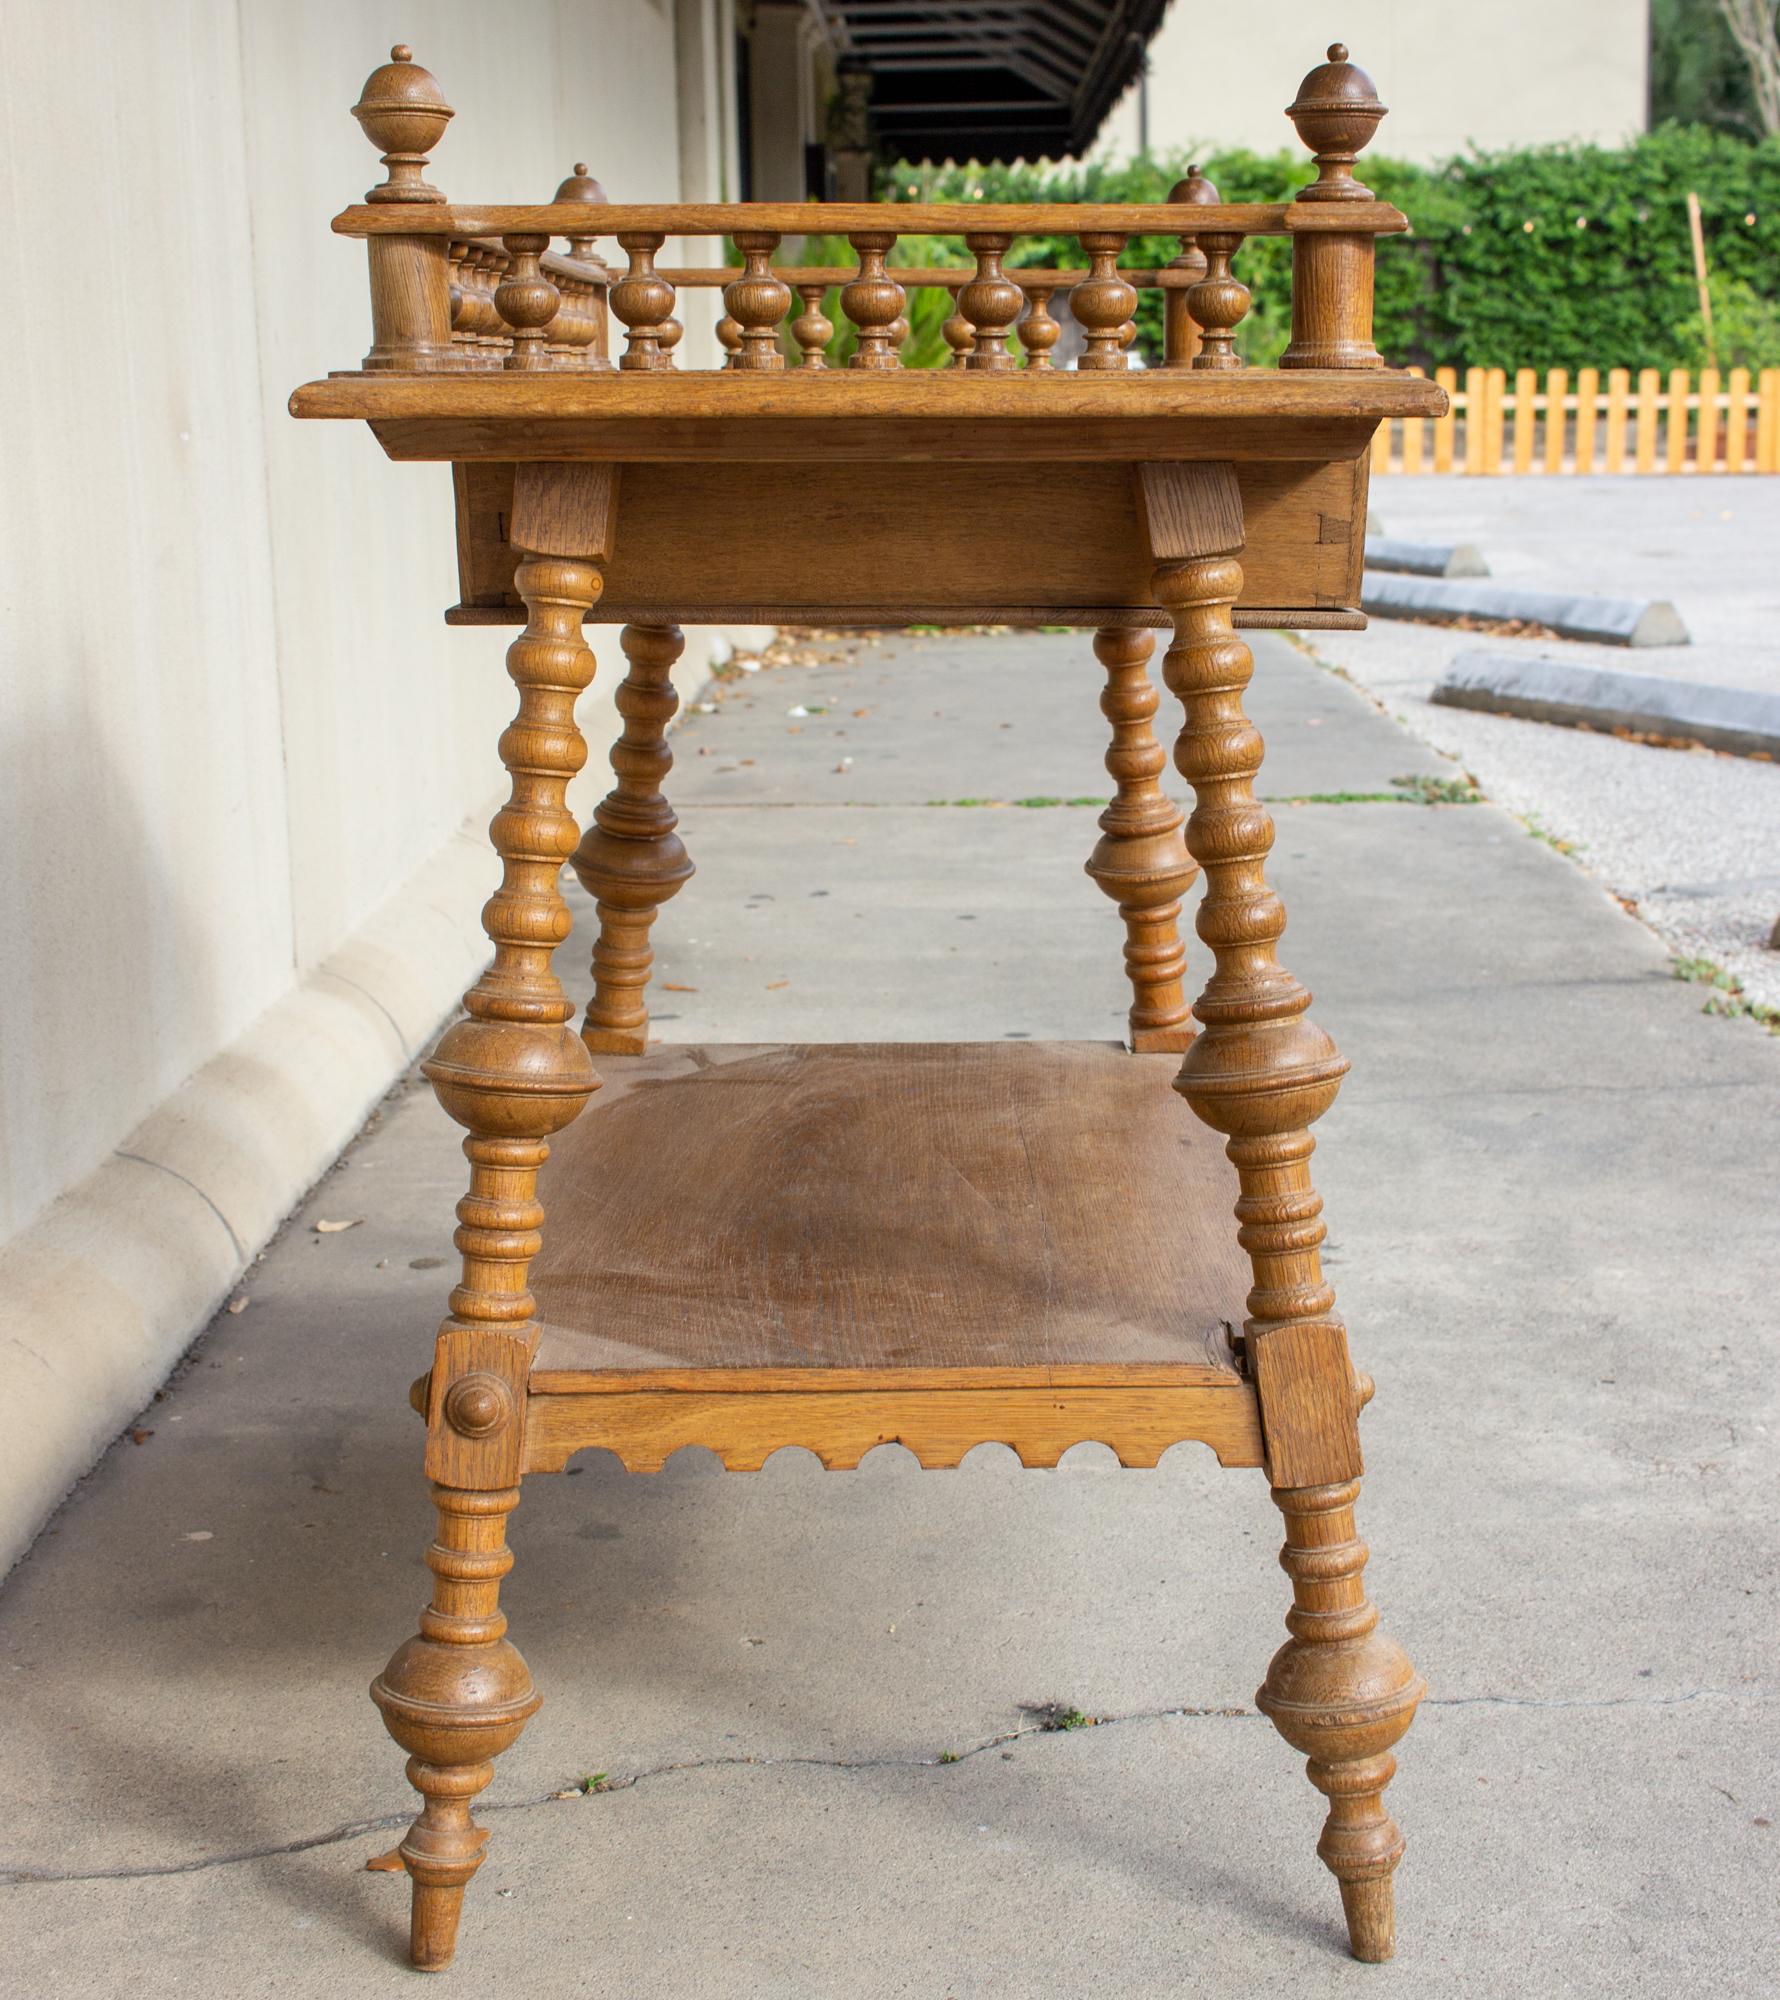 19th Century Antique French Oak Gothic Revival Spindle Leg Table with Drawer For Sale